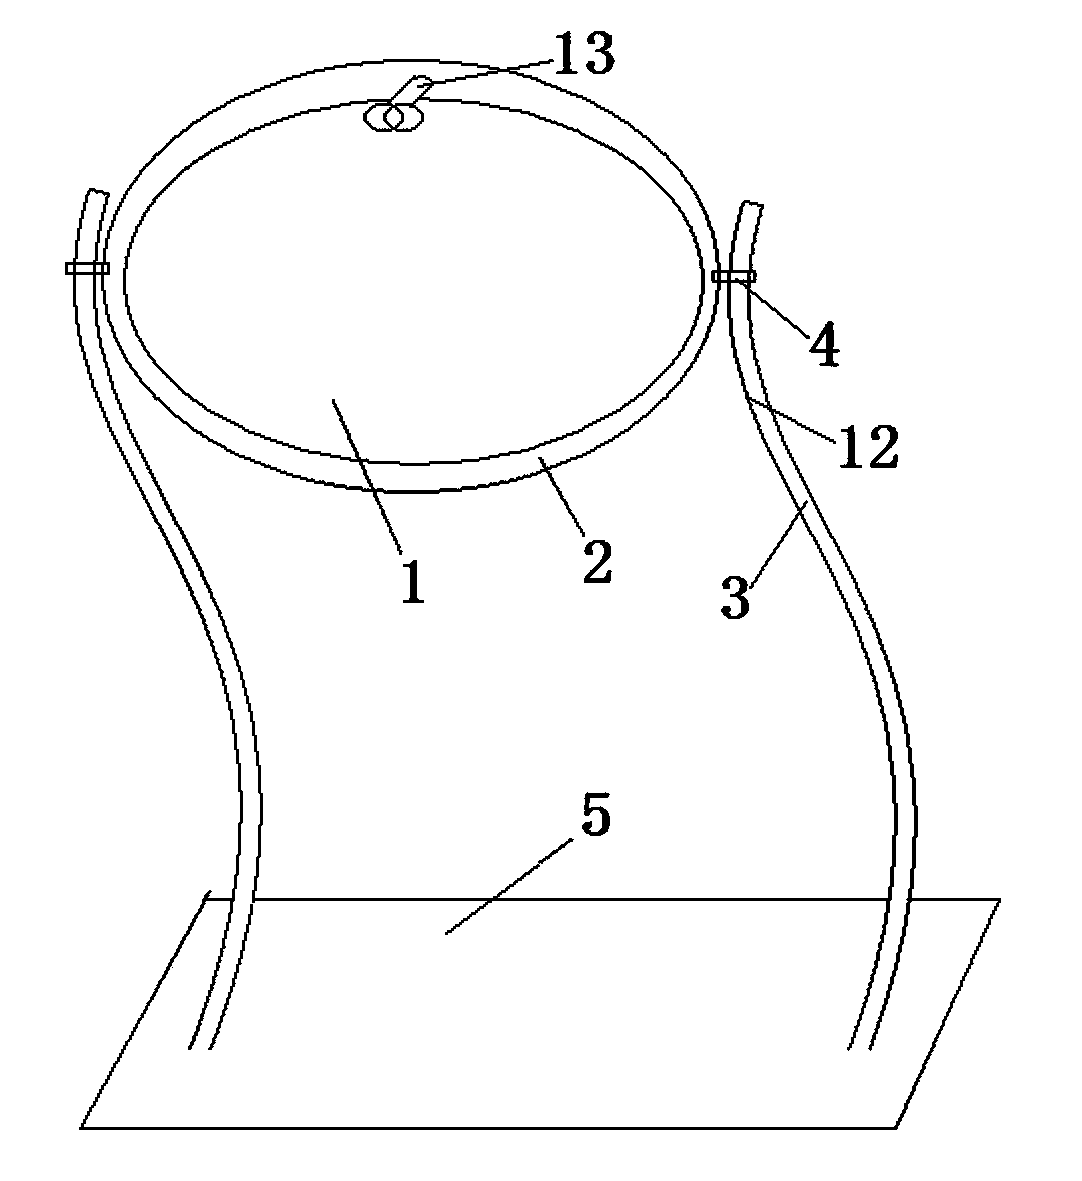 Integrated non-wearing type correction glasses